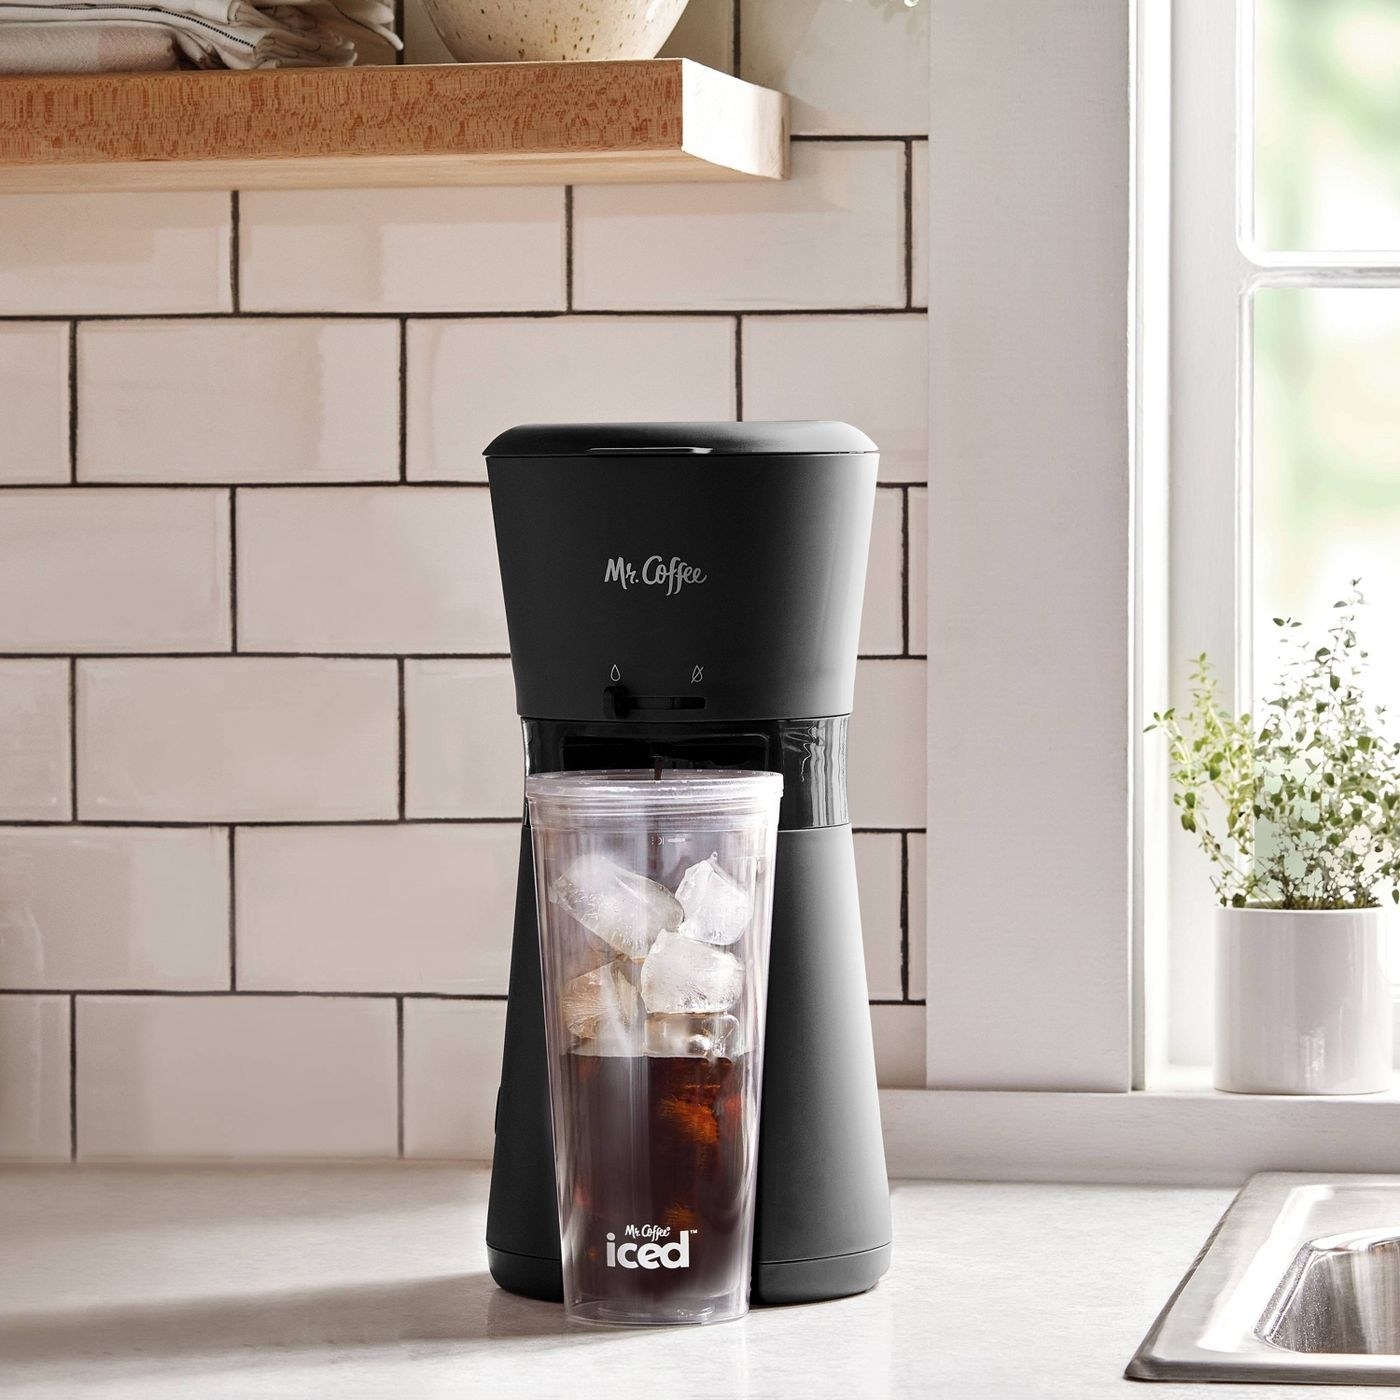 black iced coffee maker with a cup full of ice and coffee underneath